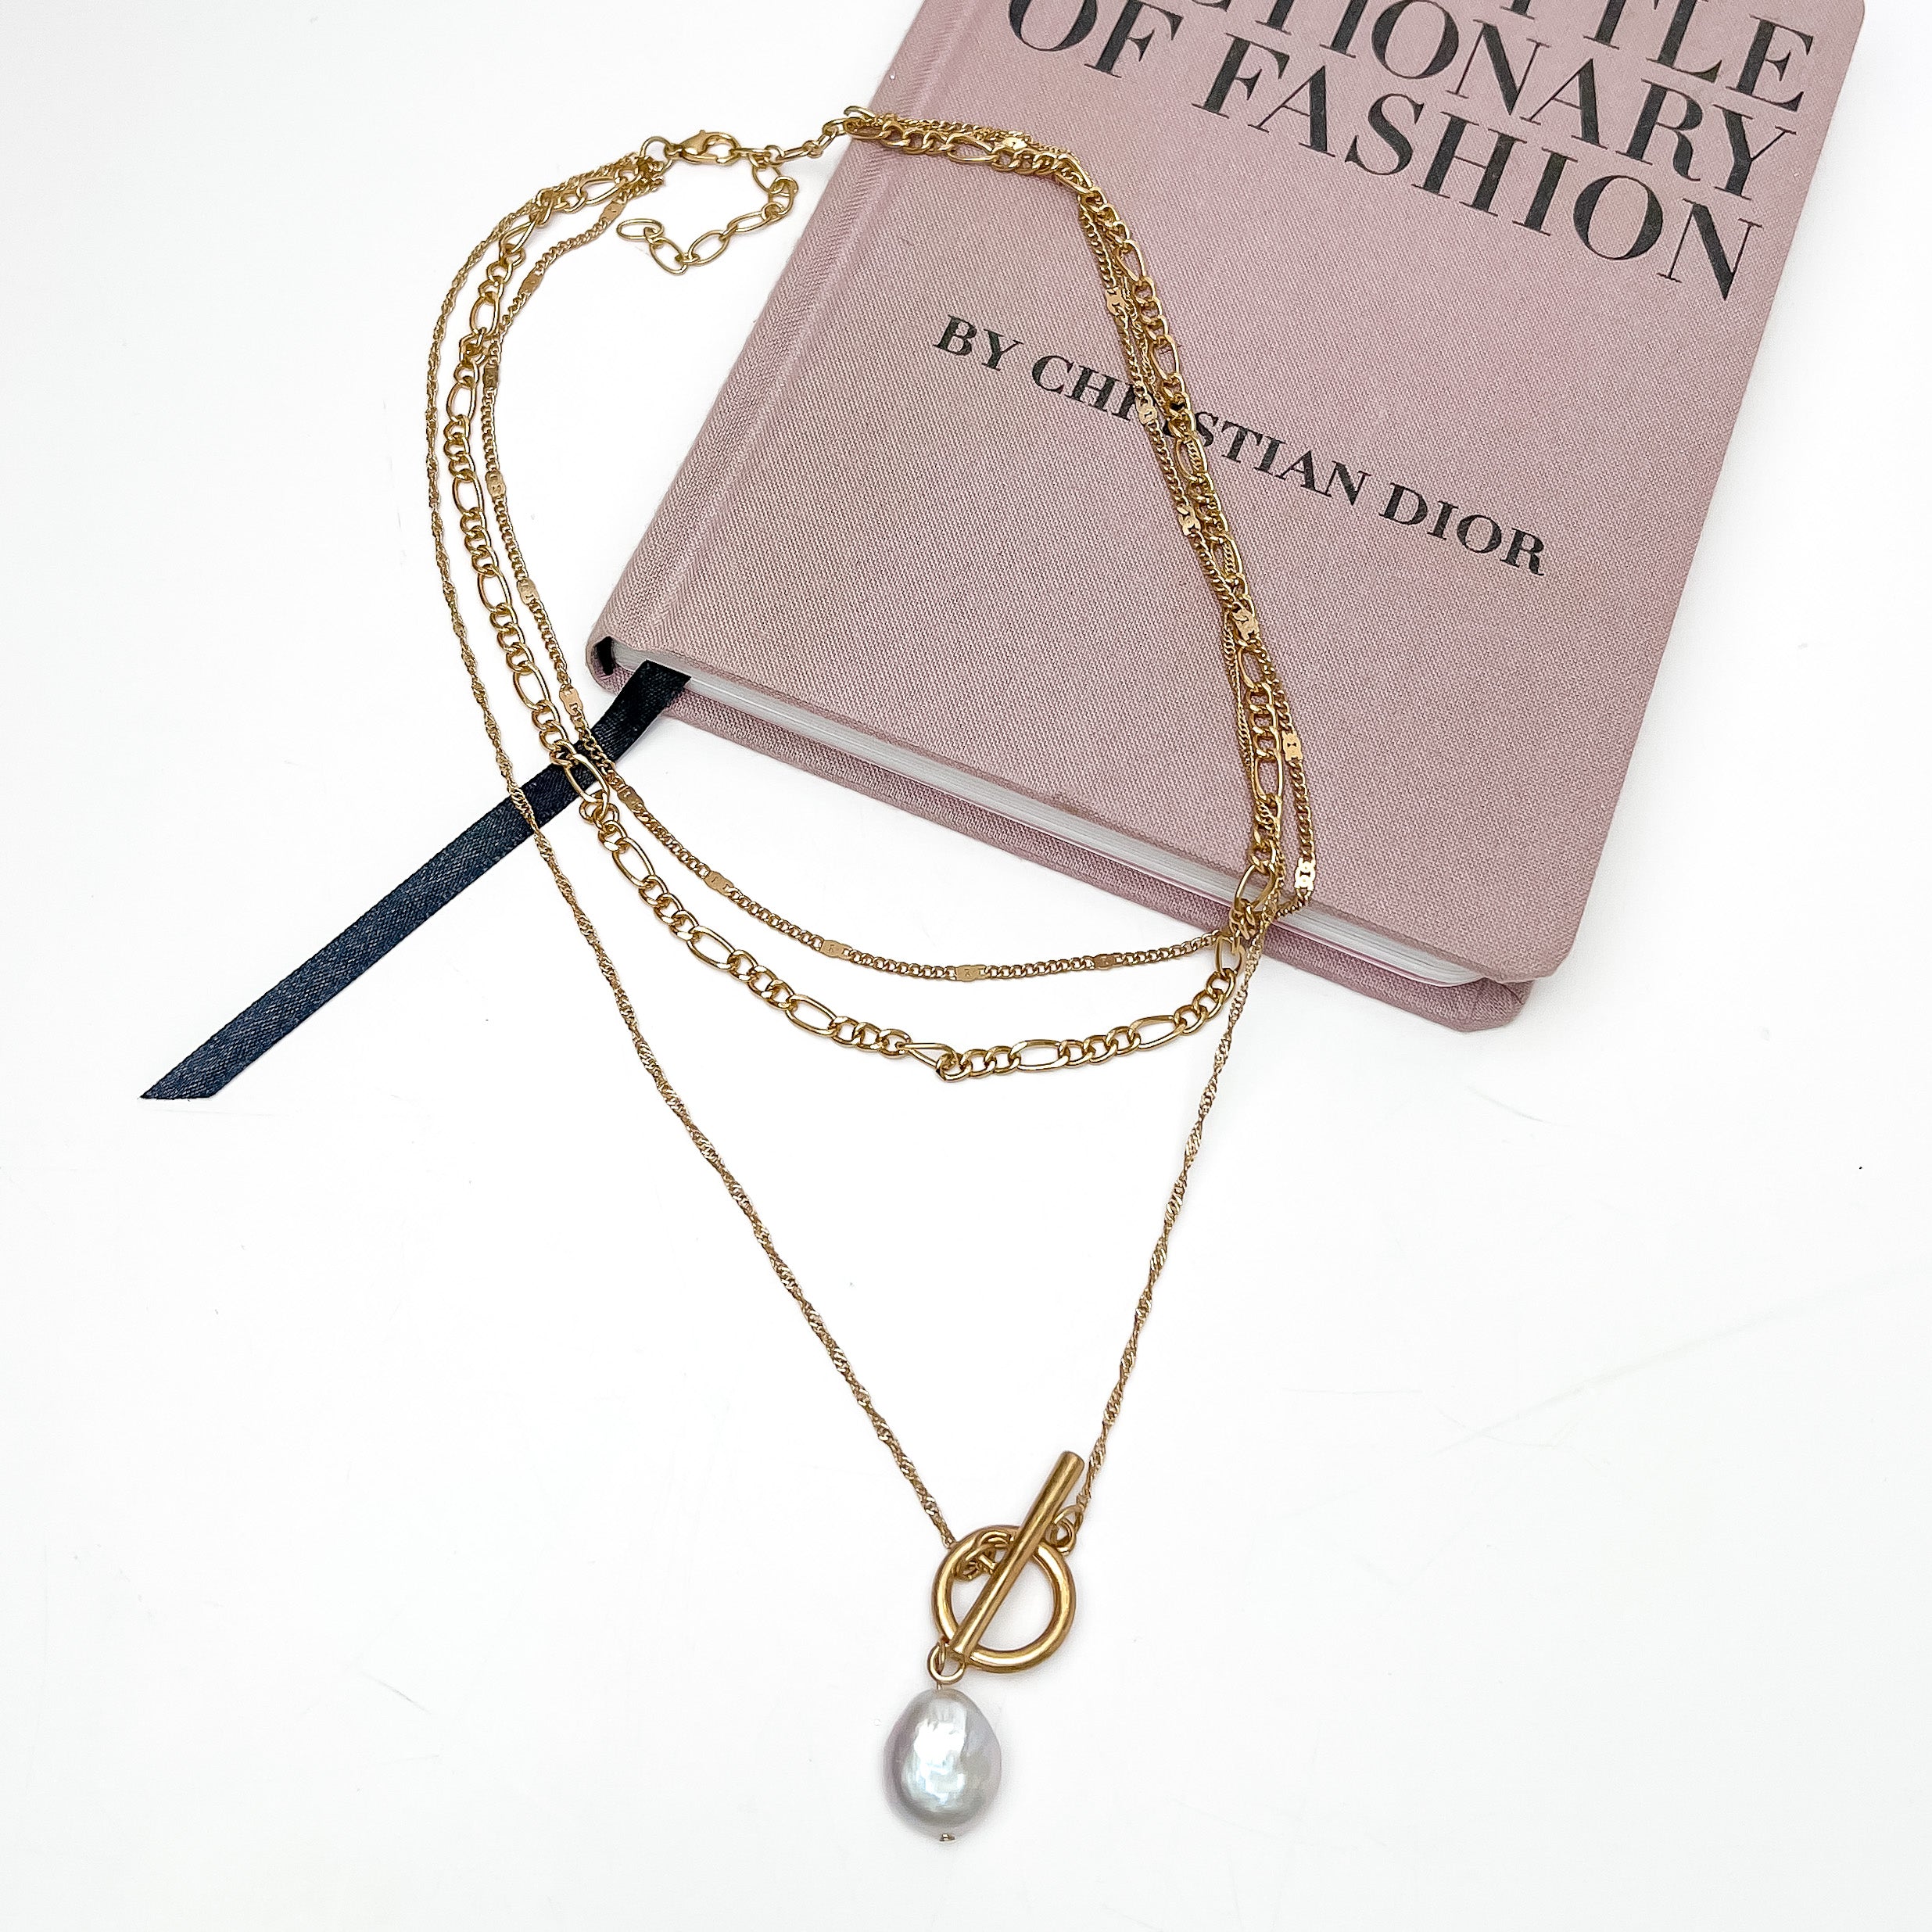 Pretty as a Pearl Gold Tone Chain Necklace. Pictured on a white background with part of the necklace laying on a pink book.